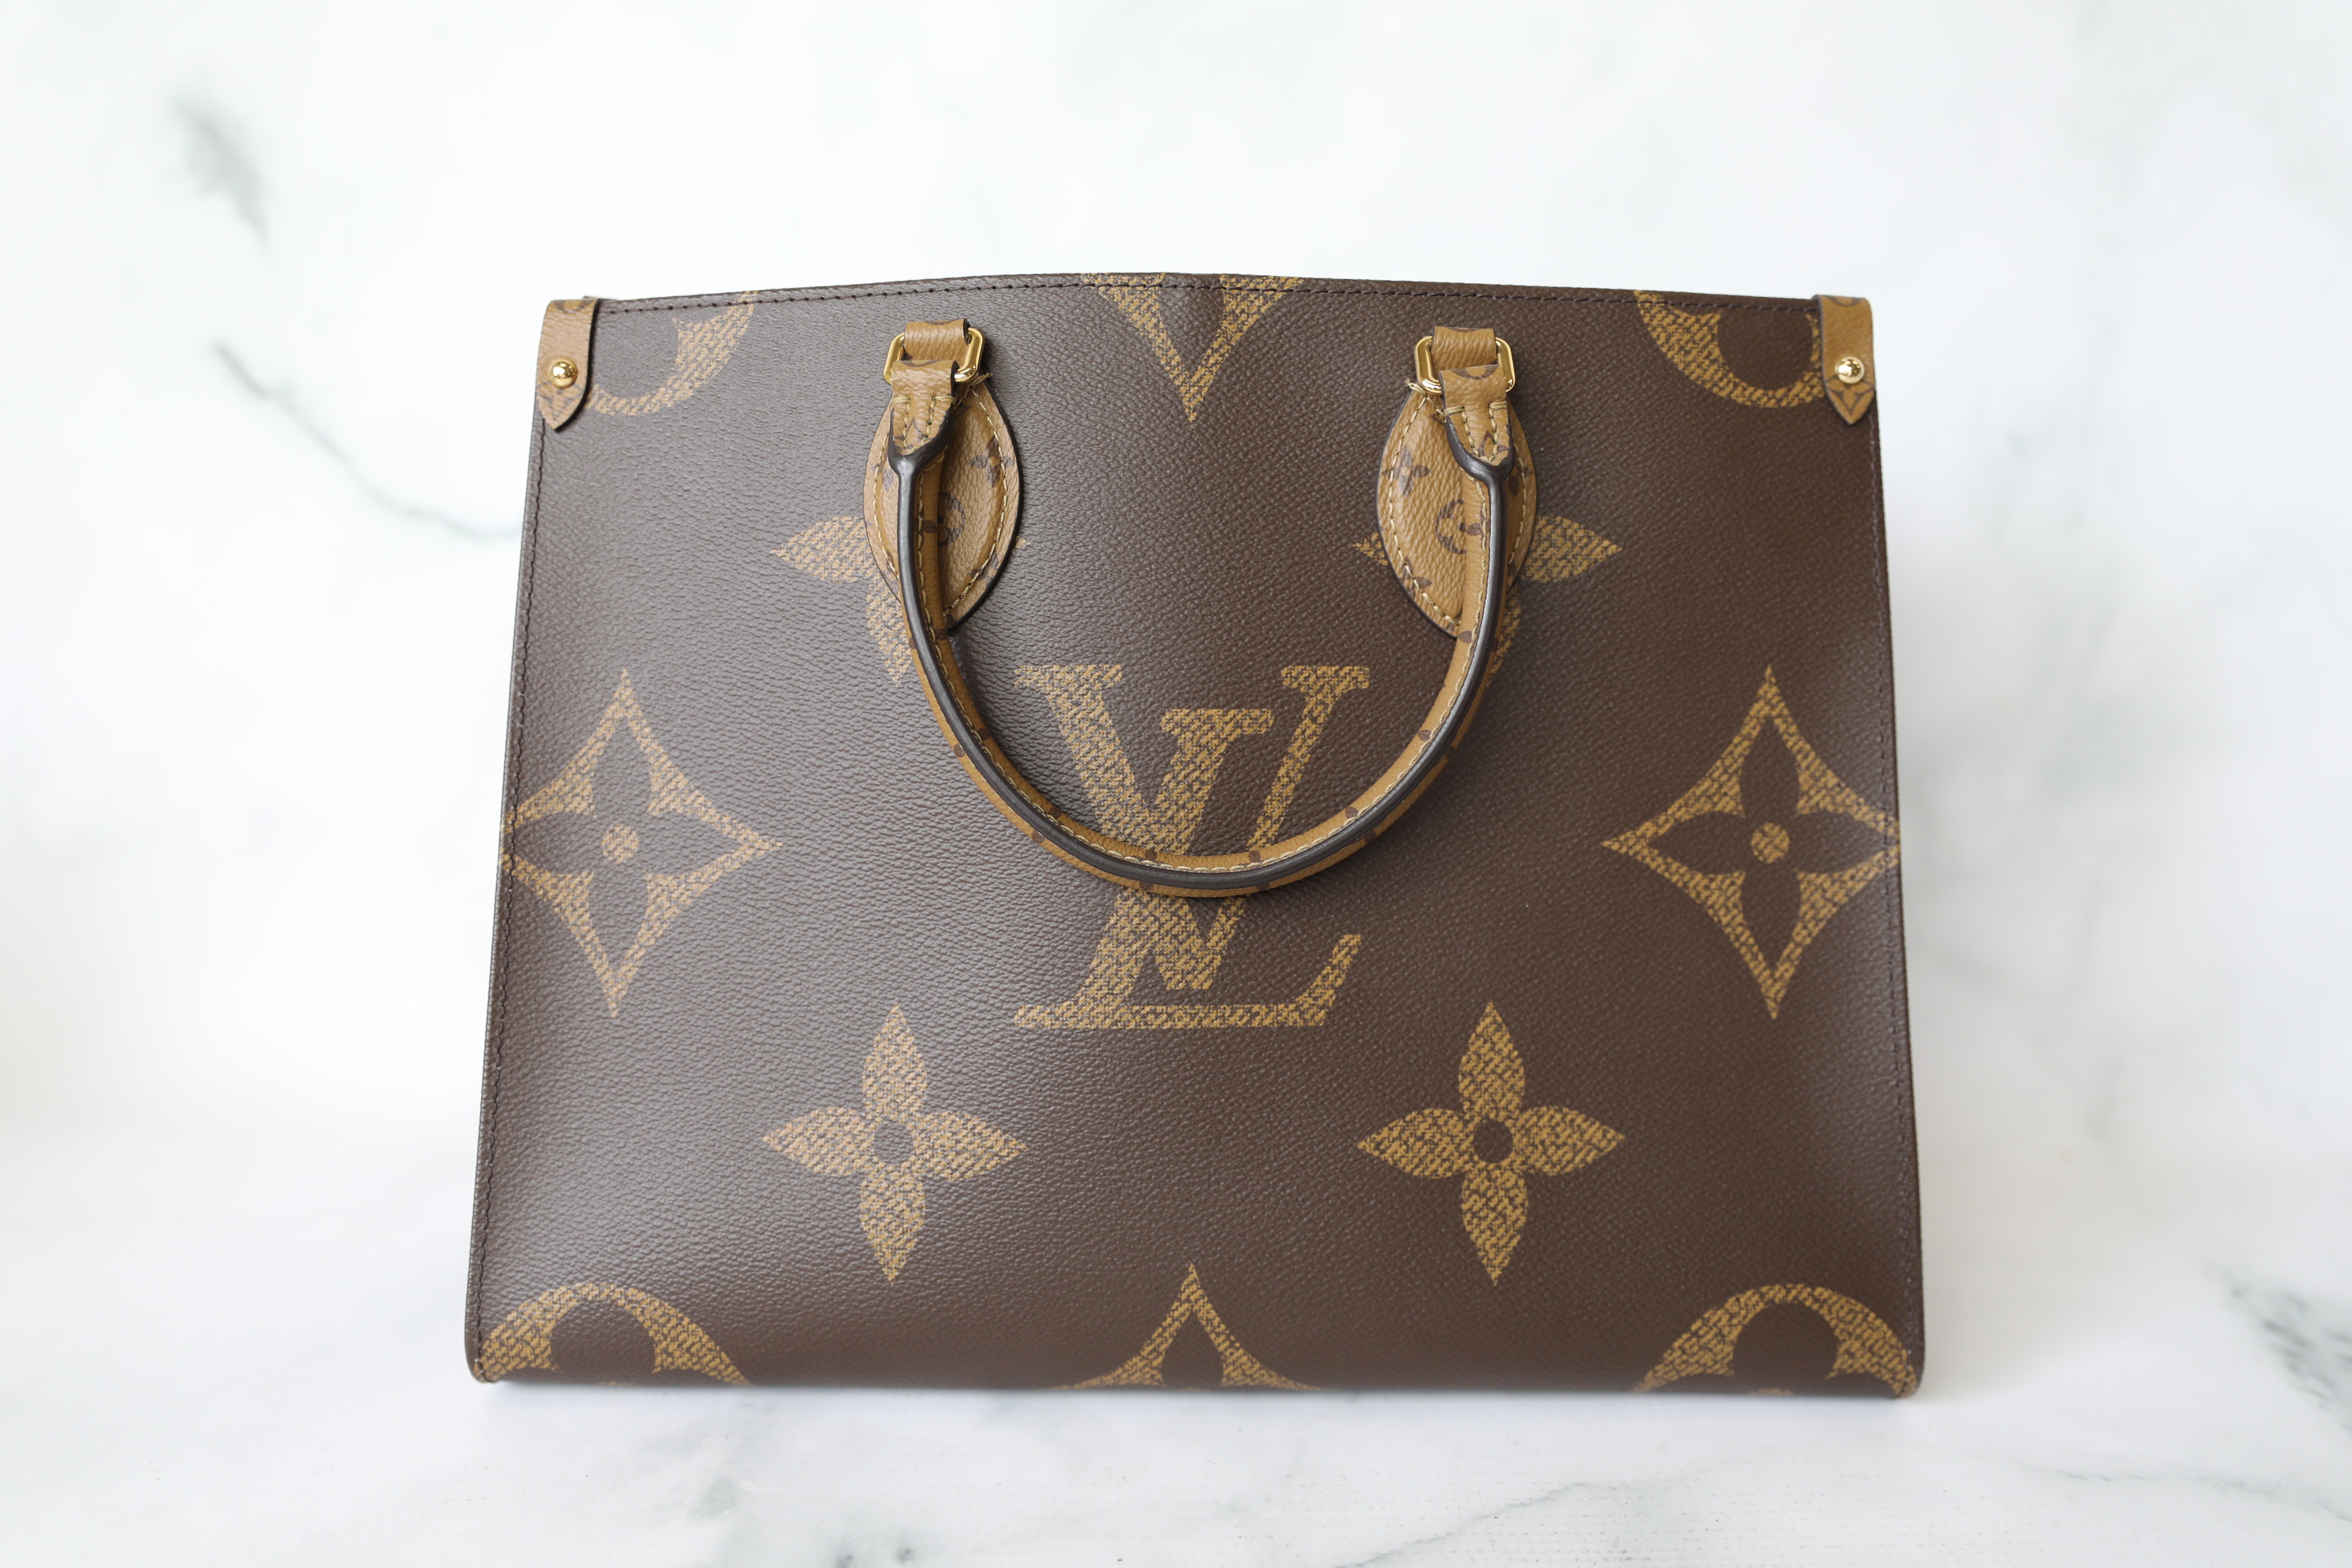 When I got back home! Woo-! Wow! From Louis Vuitton💕 So happy😆 It's sooo  great… * 帰ったら！うわー！すごーい！ ルイヴィトンさんから